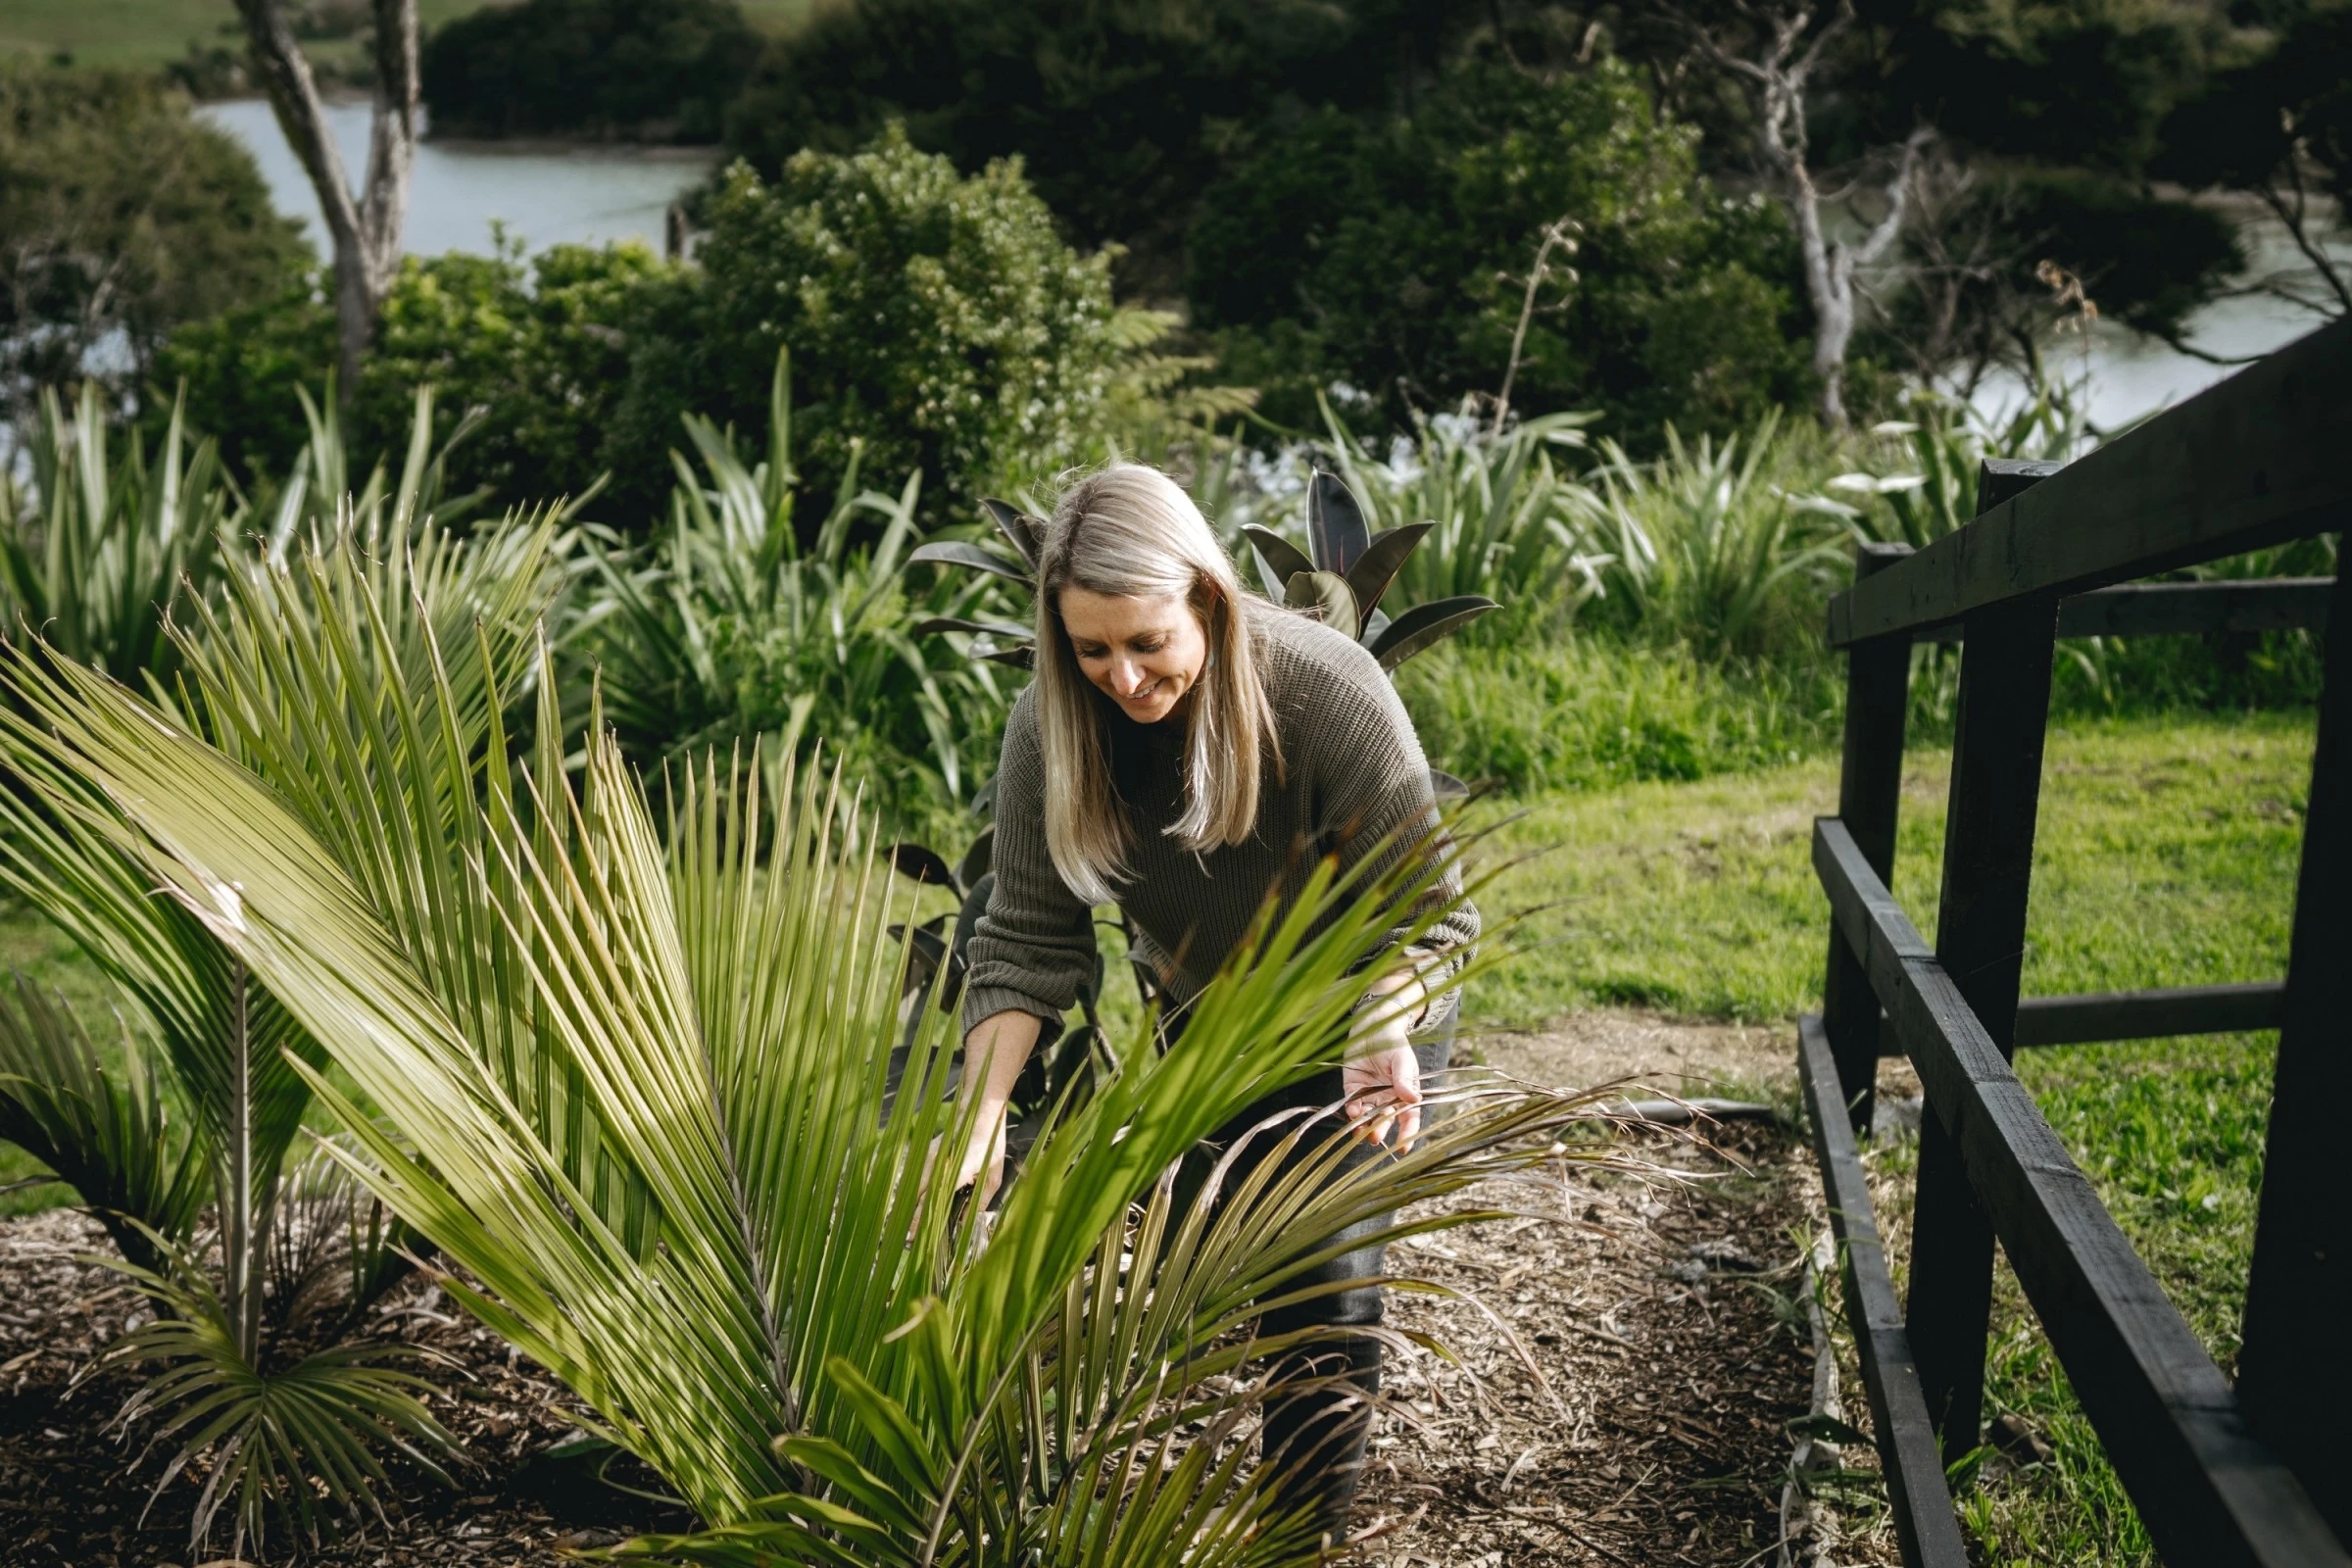 How to join or start a community garden in New Zealand